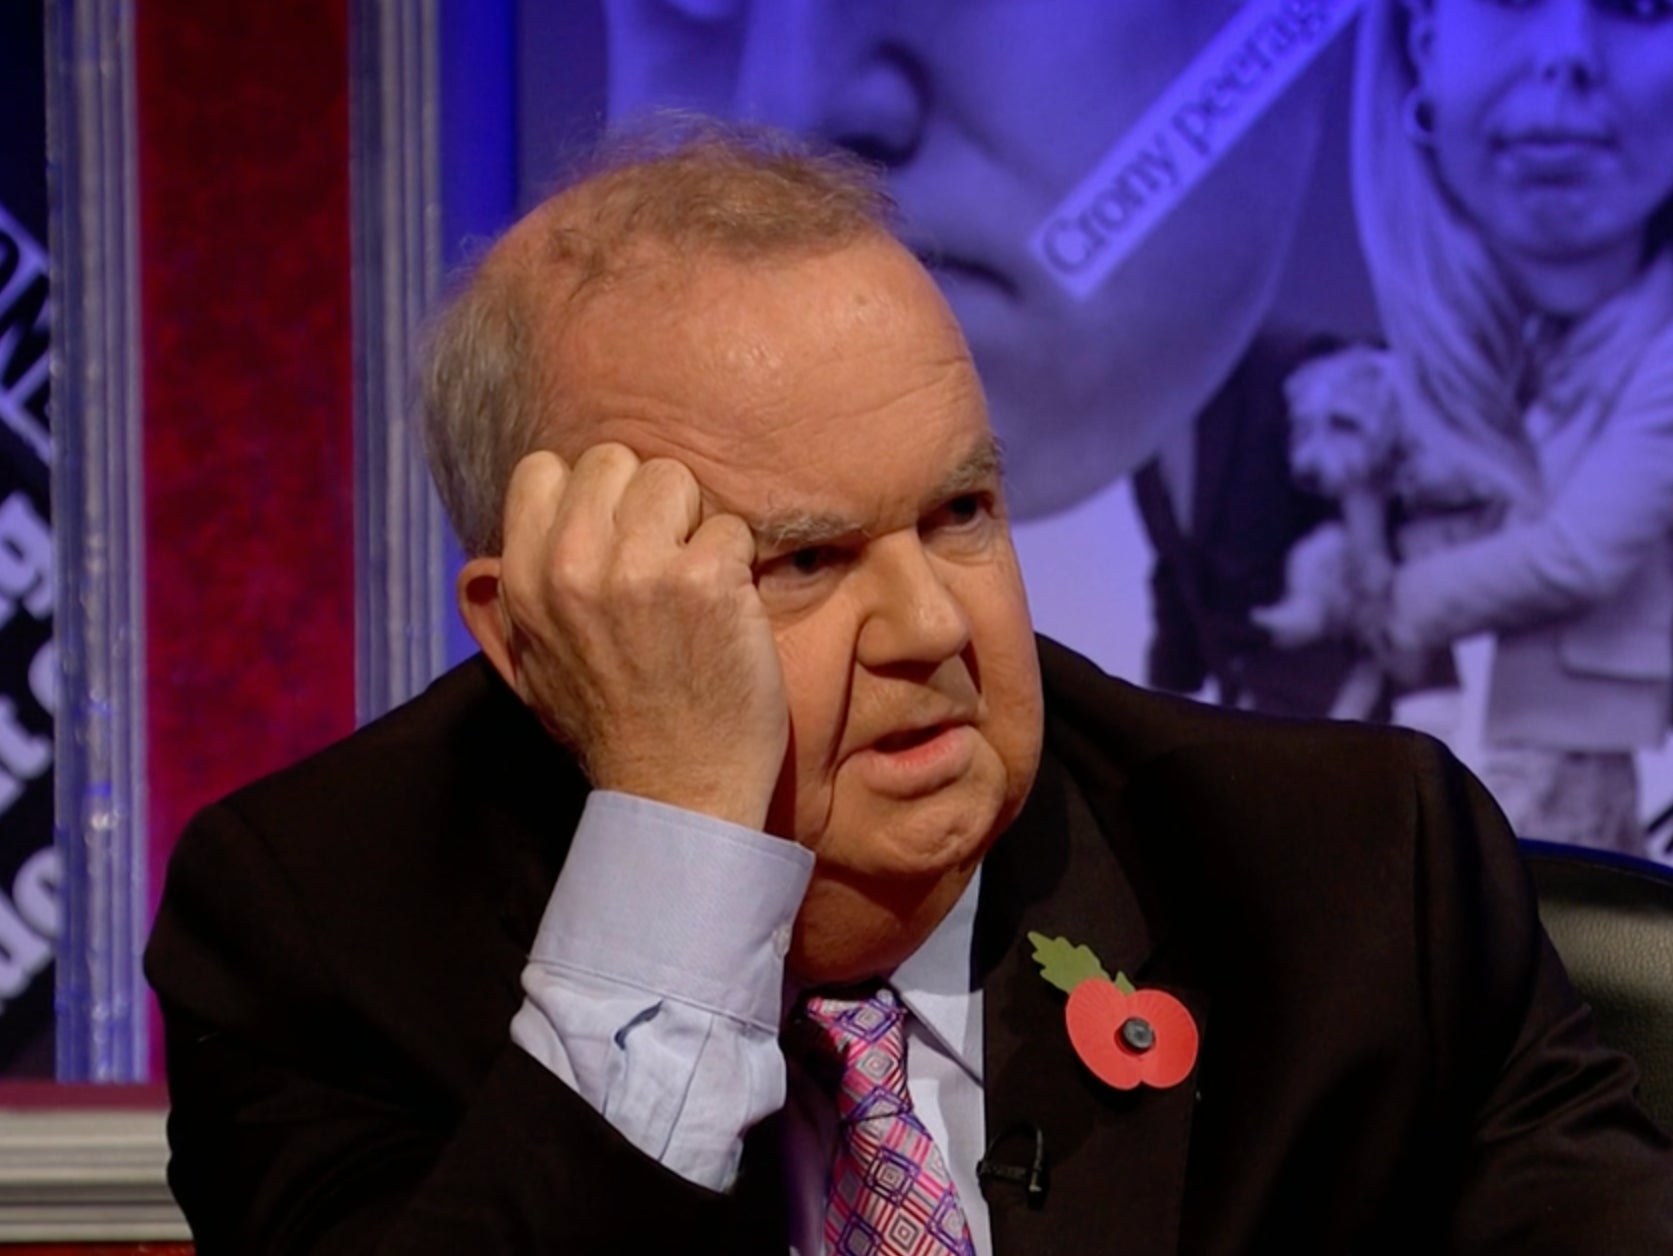 Ian Hislop called out Gary Neville on ‘Have I Got News For You’